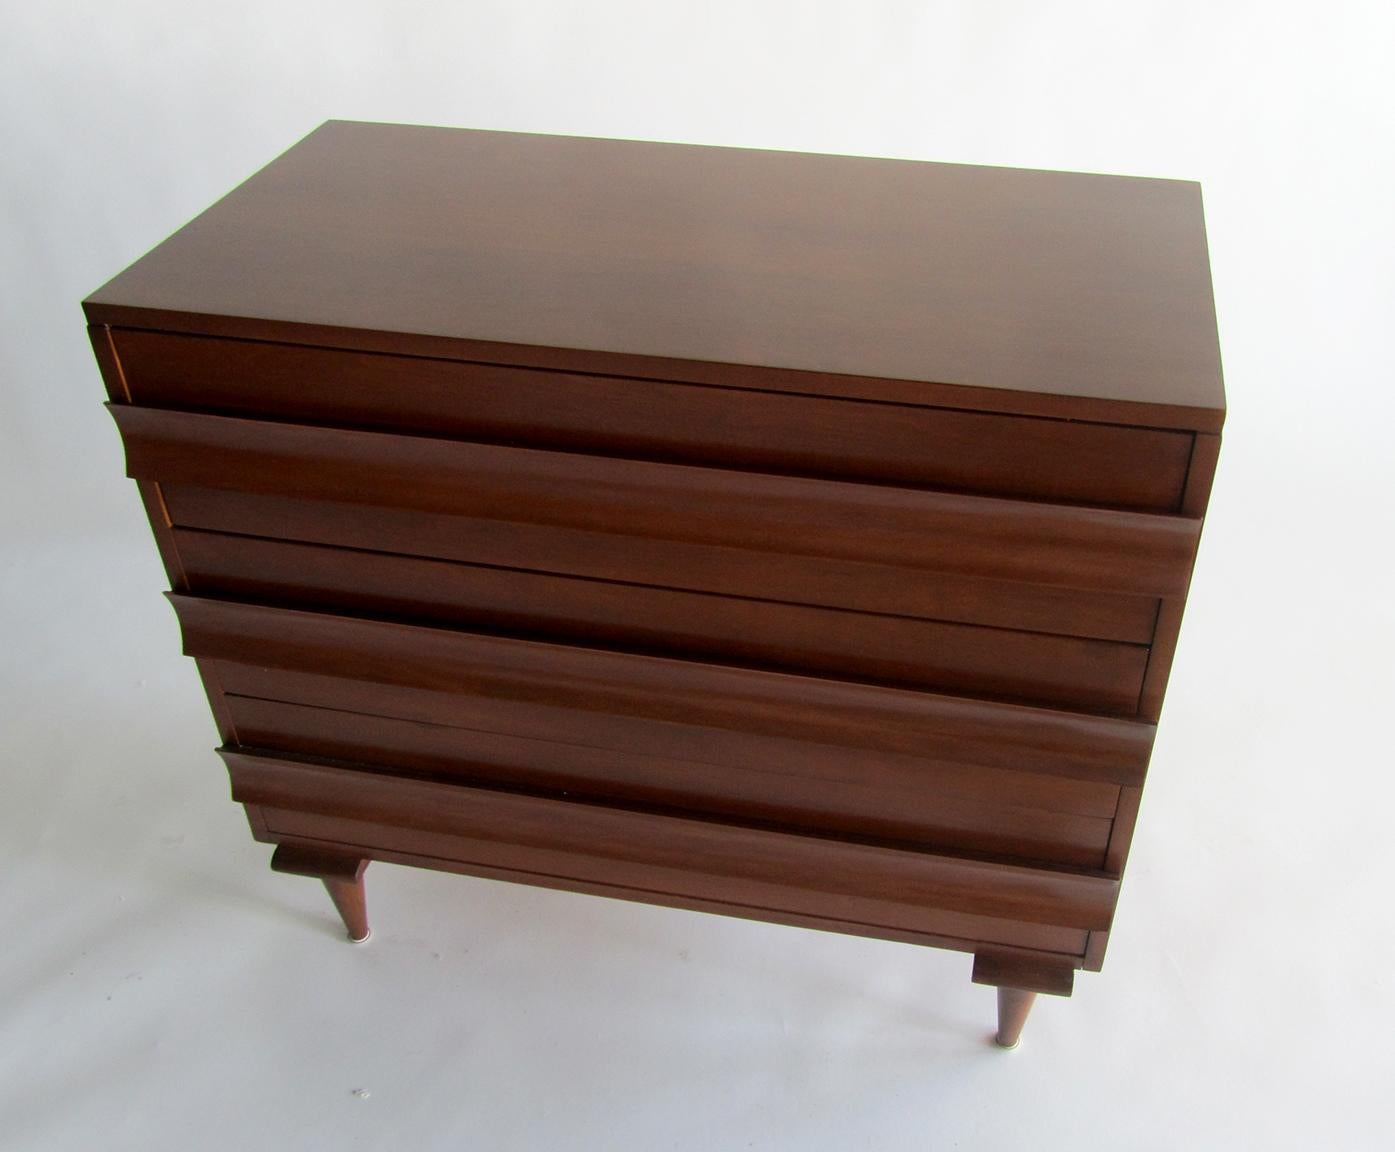 The rectangular case with 3 drawers with double ''fins